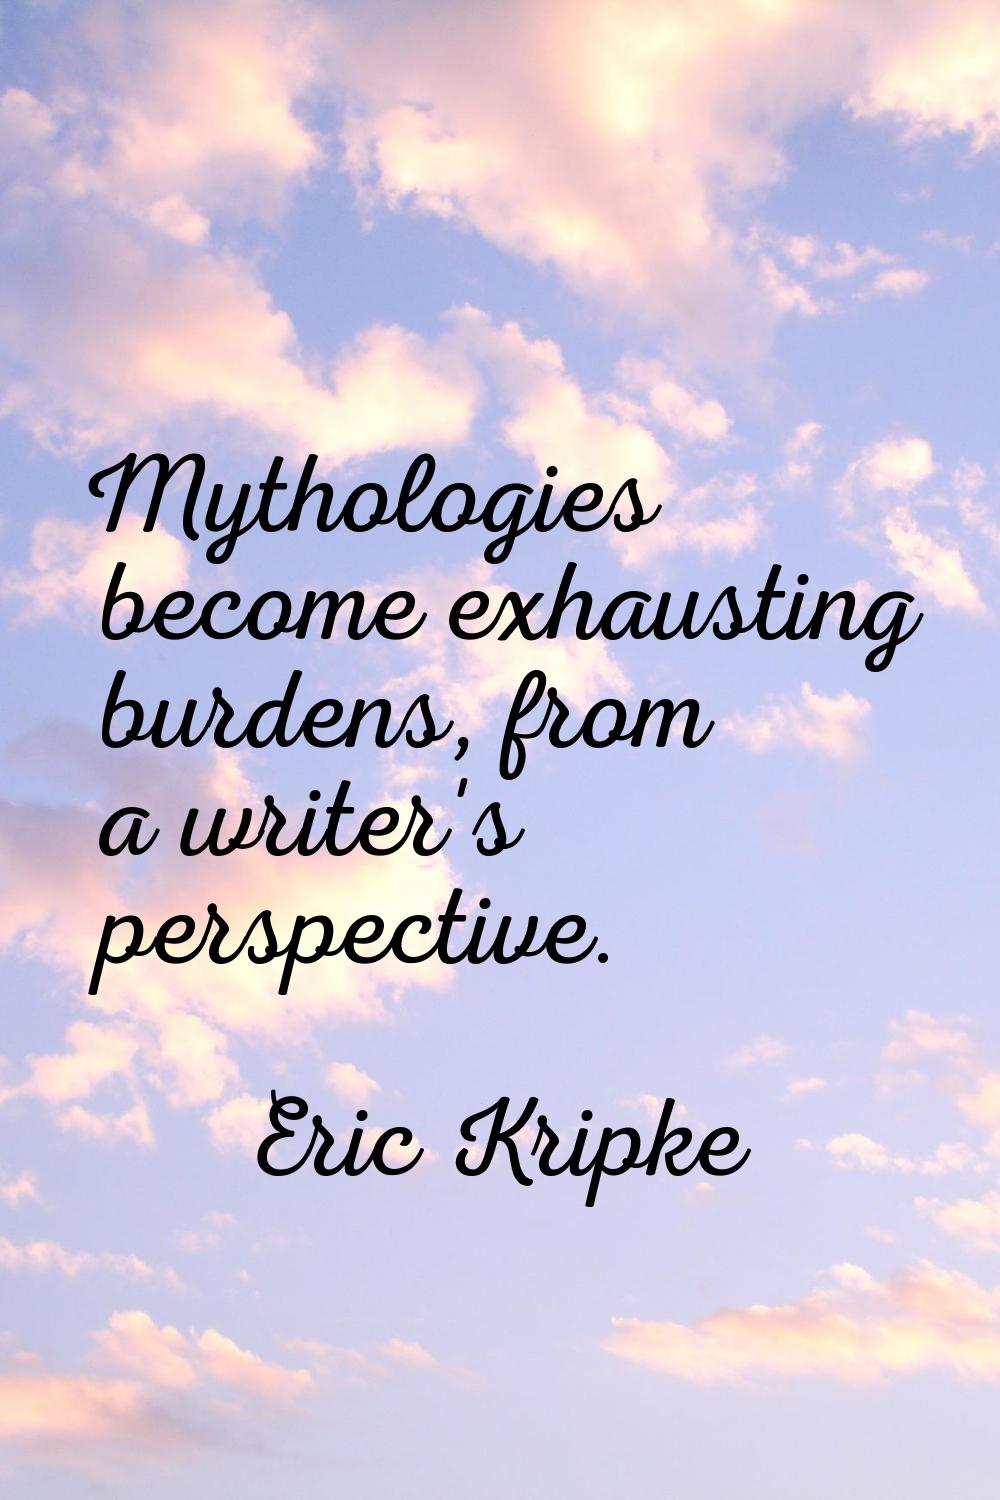 Mythologies become exhausting burdens, from a writer's perspective.